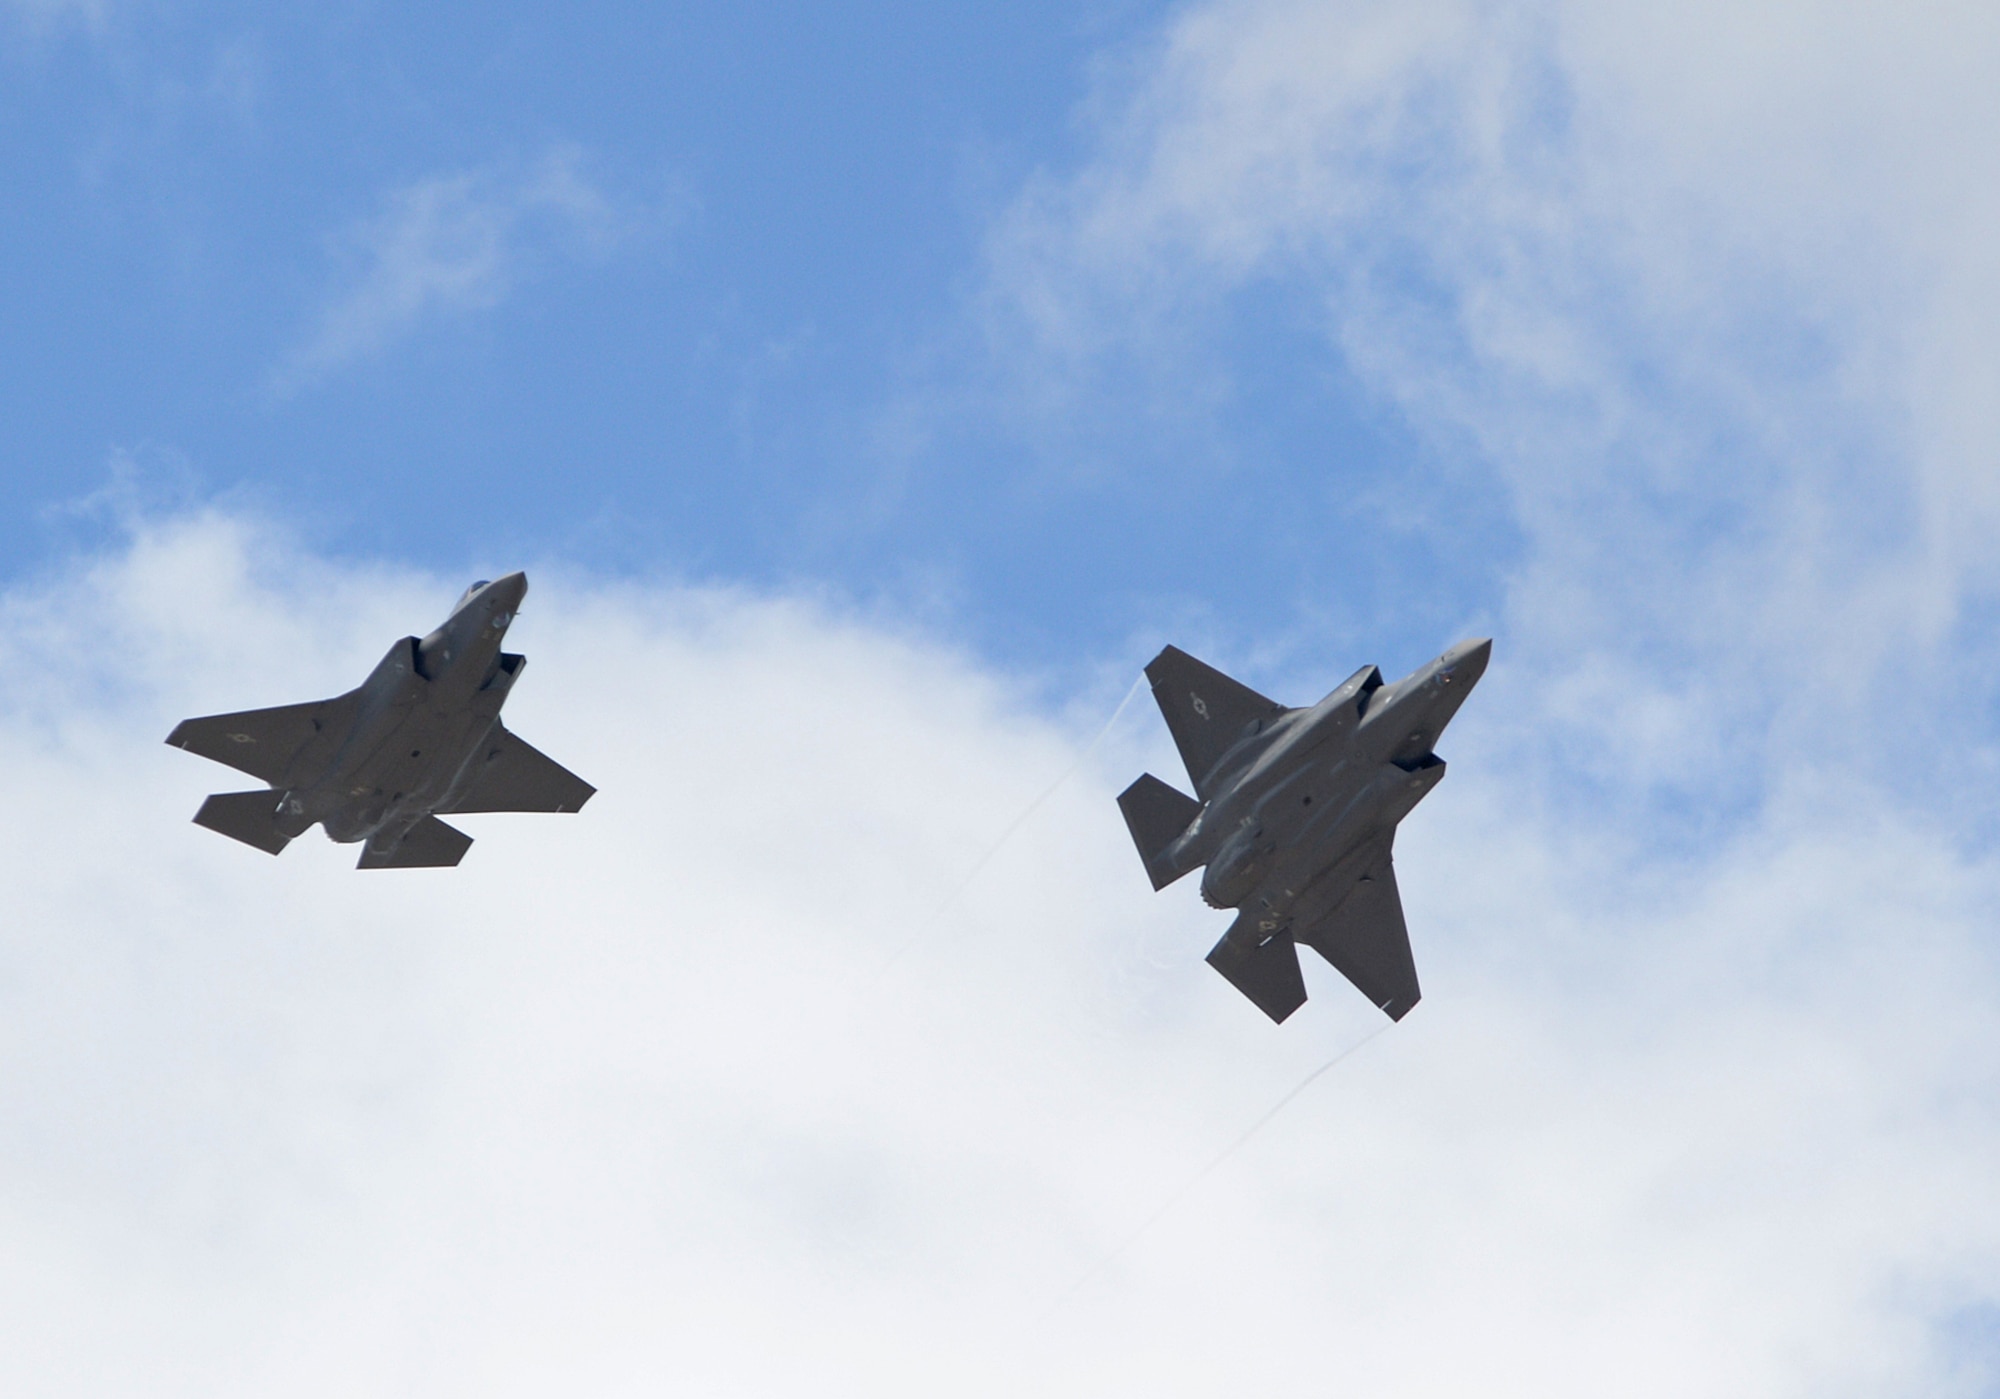 The first two operational F-35A Lightning II aircraft arrive at Hill Air Force Base, Utah, Sept. 2, 2015. The jets were piloted by Col. David Lyons, 388th Fighter Wing commander, and Lt. Col. Yosef Morris, 34th Fighter Squadron director of operations. Hill will receive up to 70 additional combat-coded F-35s on a staggered basis through 2019. The jets will be flown and maintained by Hill Airmen assigned to the active-duty 388th Fighter Wing and its Reserve component 419th Fighter Wing. (U.S. Air Force photo by Alex R. Lloyd)